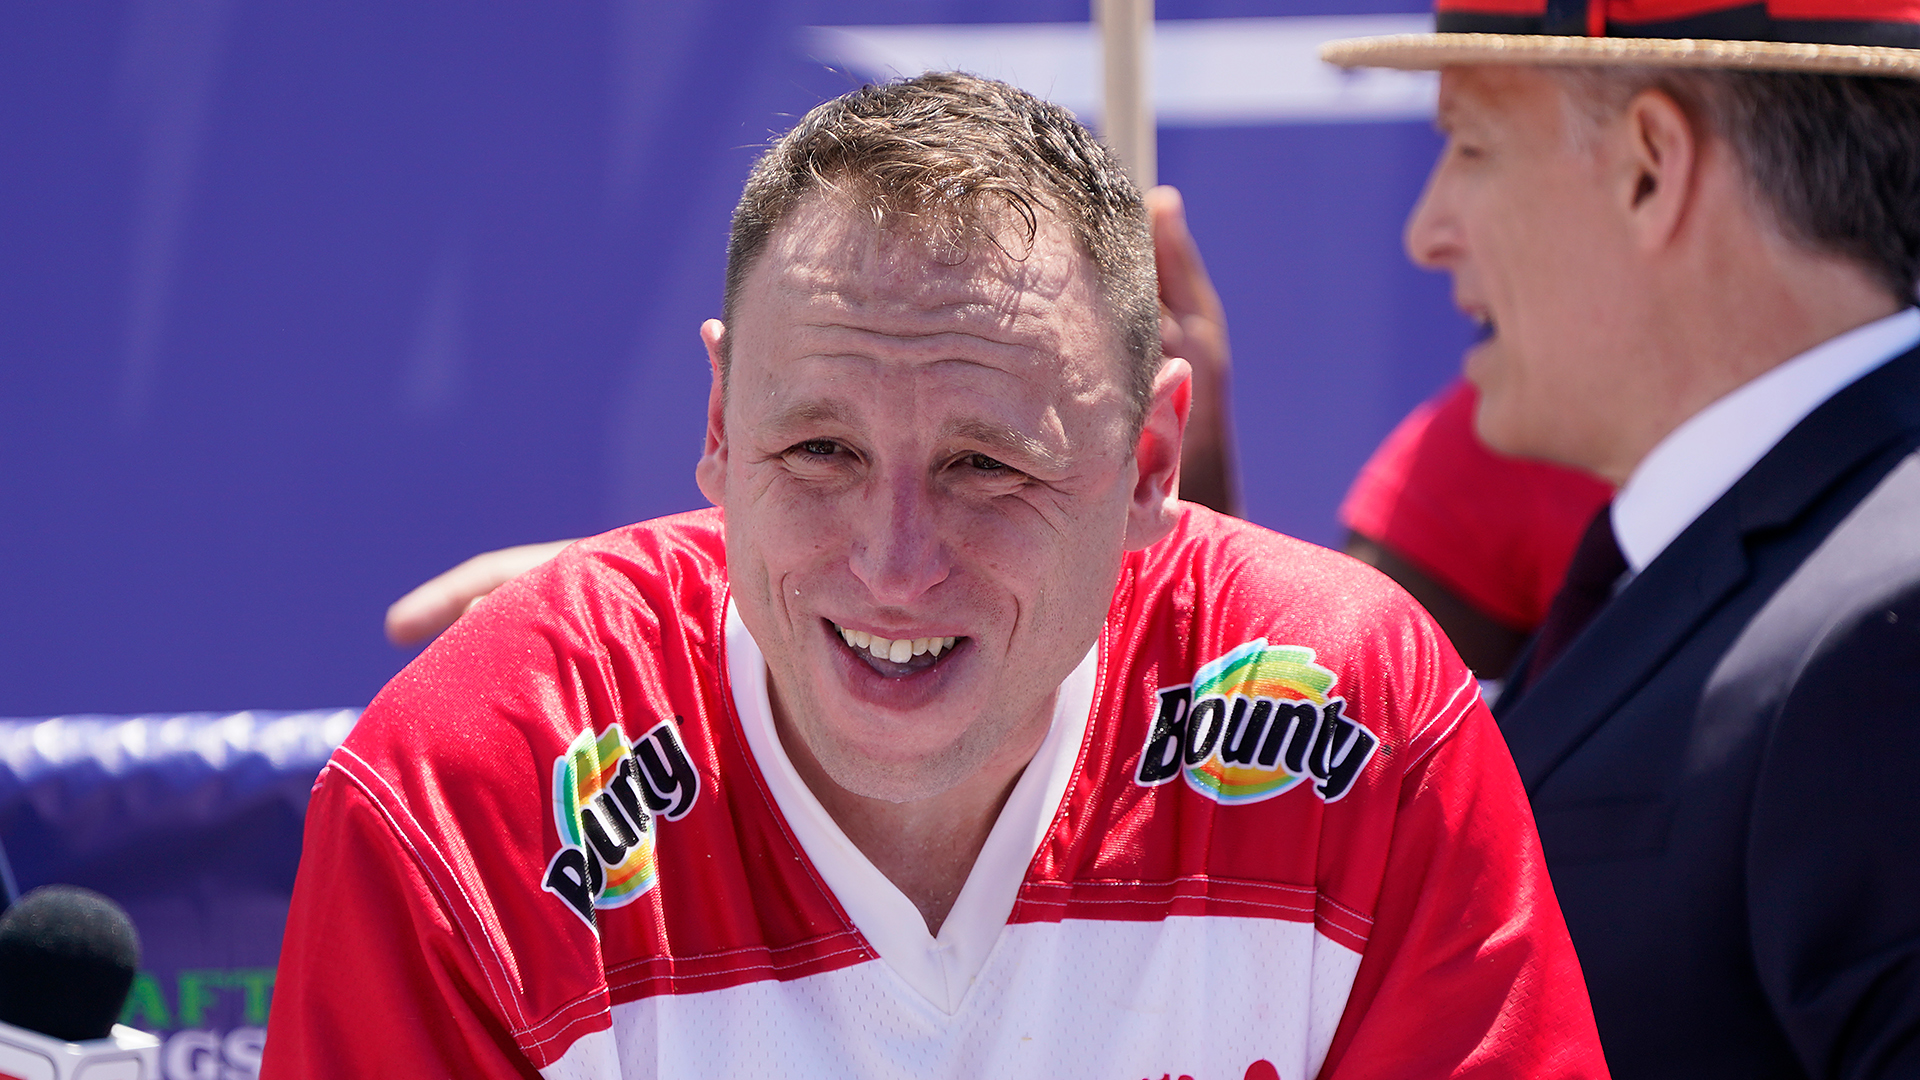 Nathan’s confirms Joey Chestnut is not banned from hot dog eating contest – but would have to take action to compete [Video]